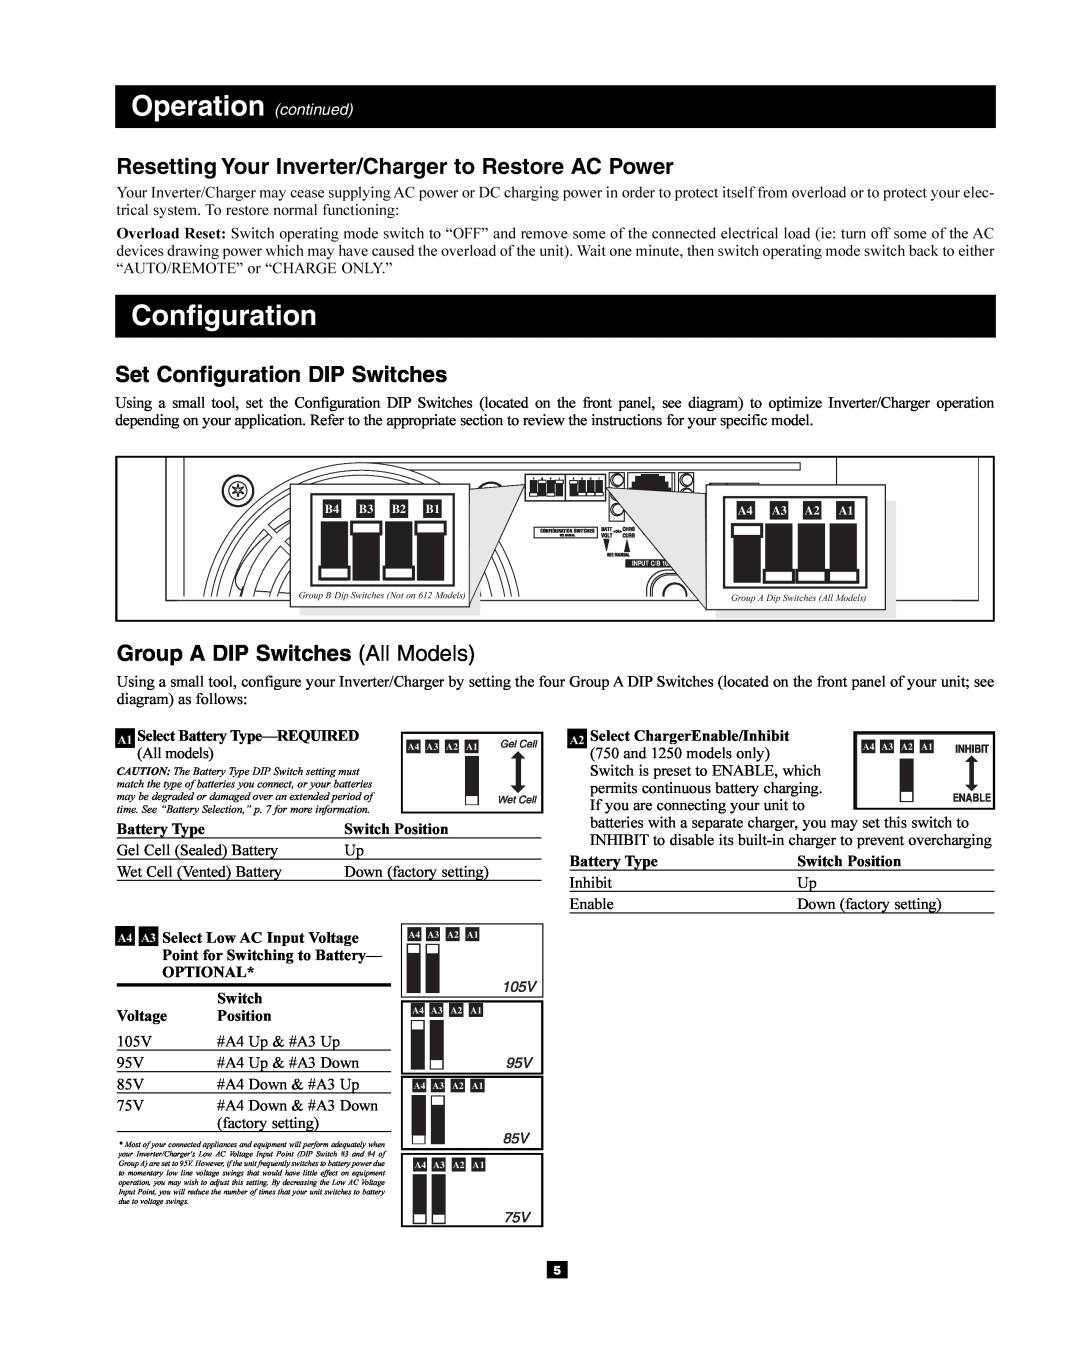 Tripp Lite 200712159, 93-2768 Resetting Your Inverter/Charger to Restore AC Power, Set Configuration DIP Switches 